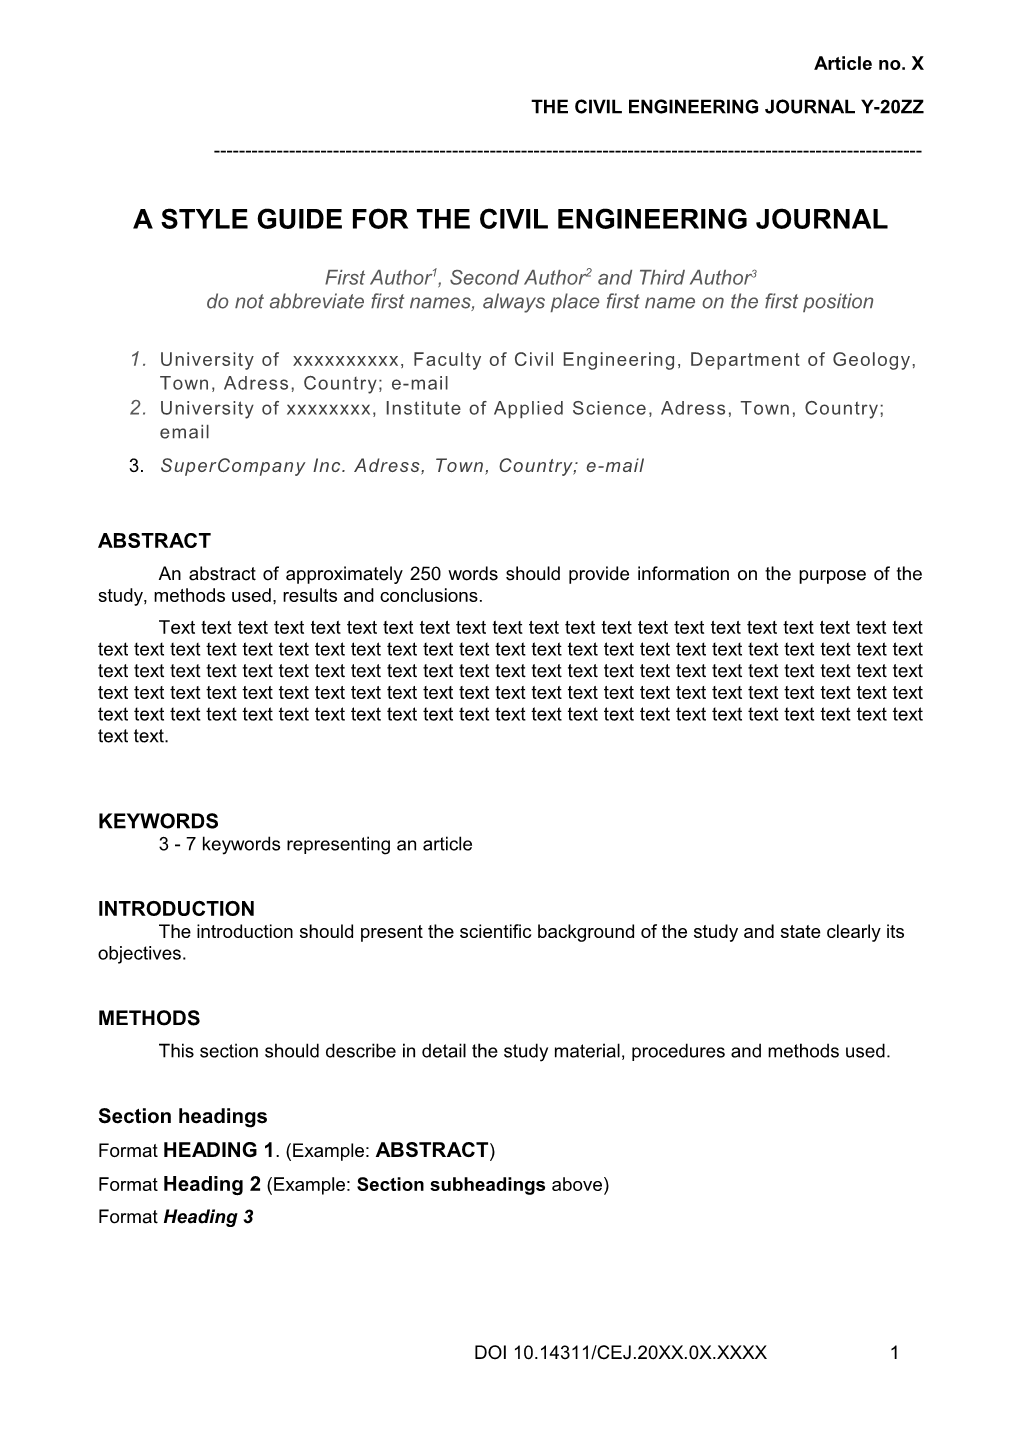 Style Guide for the Civil Engineering Journal